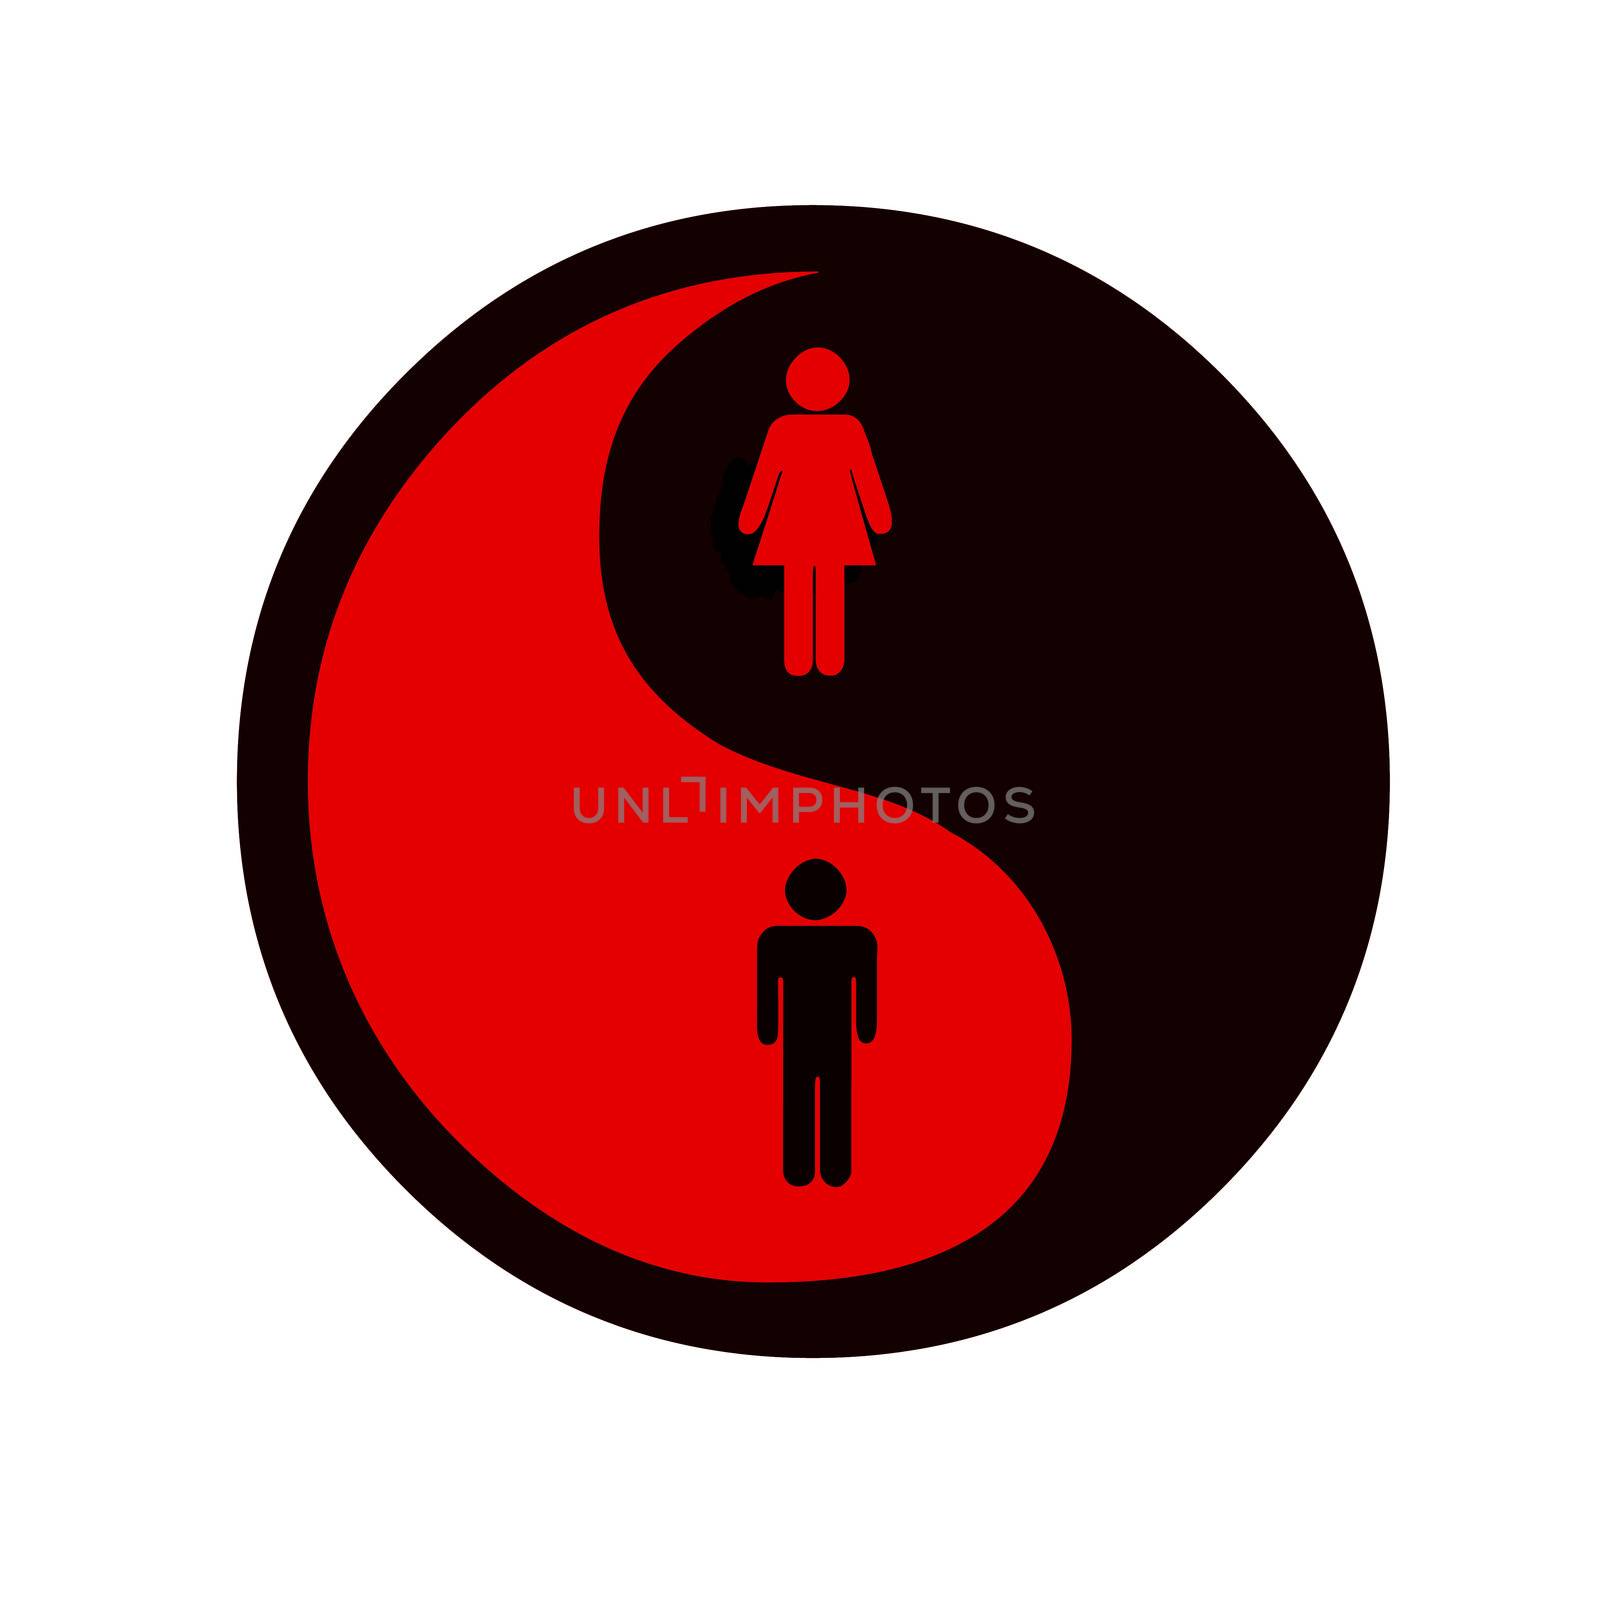 yin and yang symbol on equality of gender